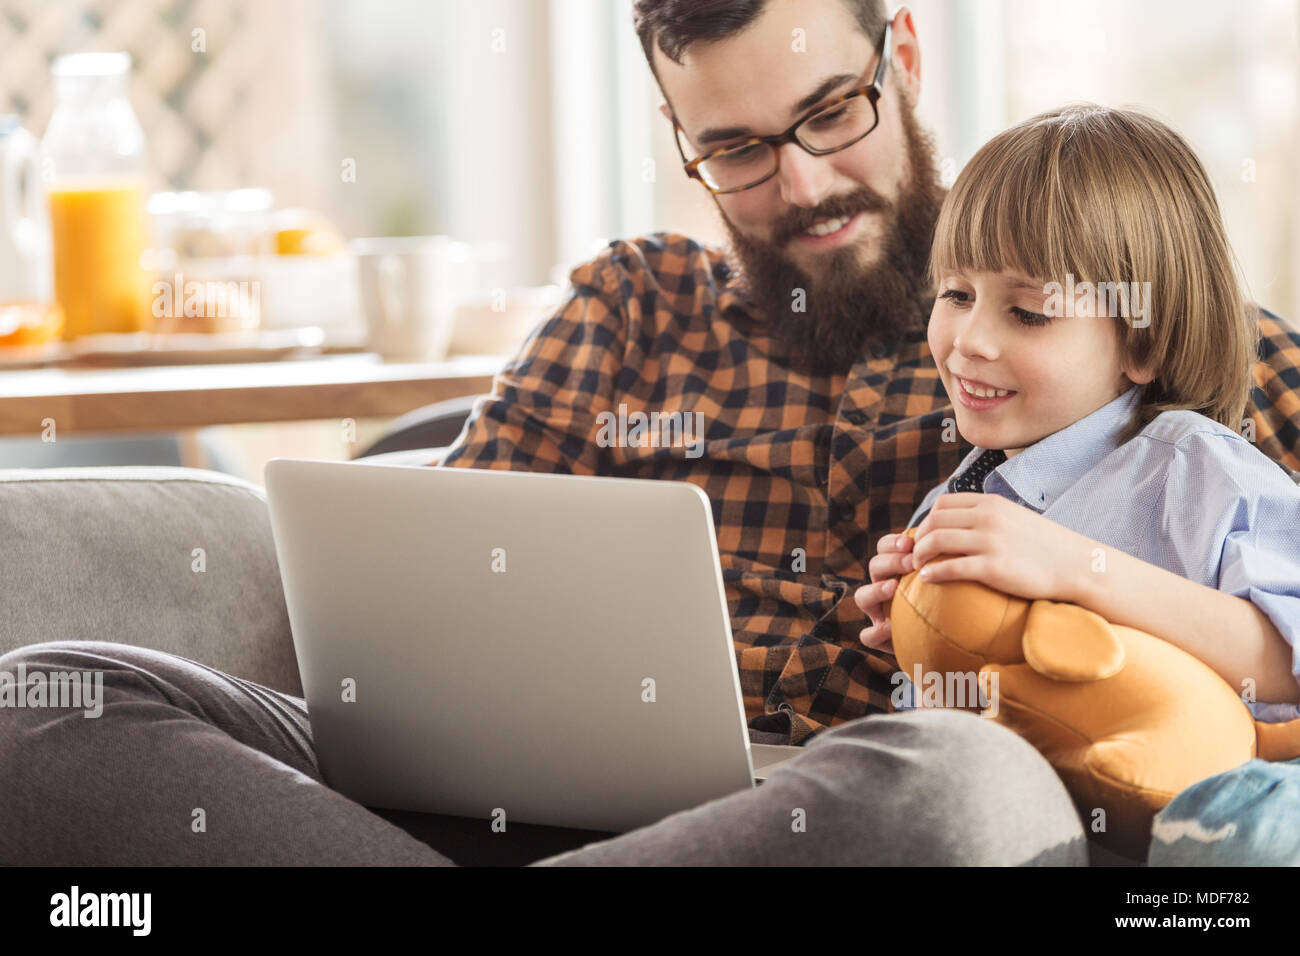 Smiling father and son watching a movie together while sitting on a sofa Stock Photo